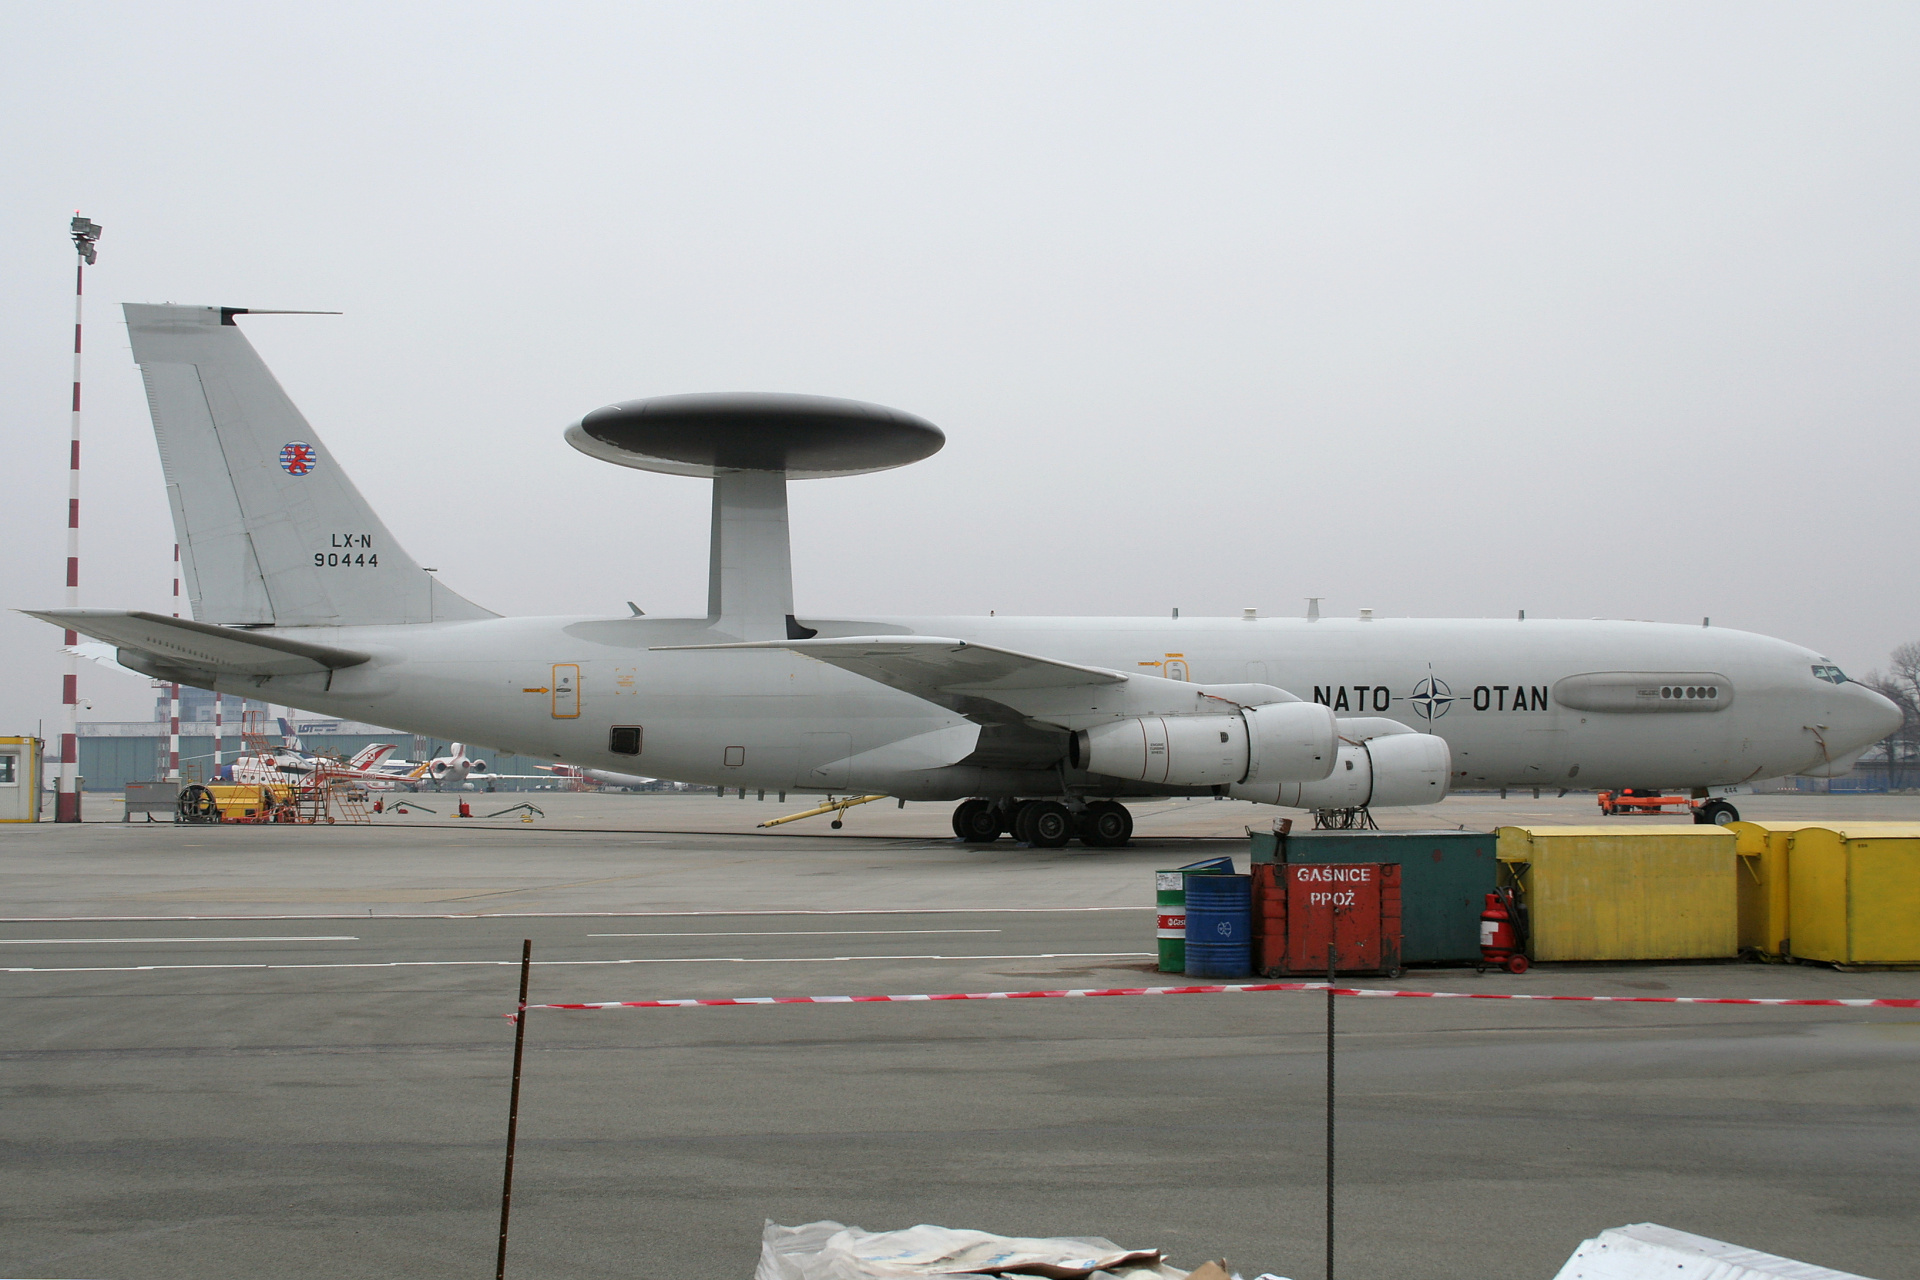 LX-N 90444, NATO Airborne Early Warning Force (Aircraft » EPWA Spotting » Boeing E-3A Sentry)